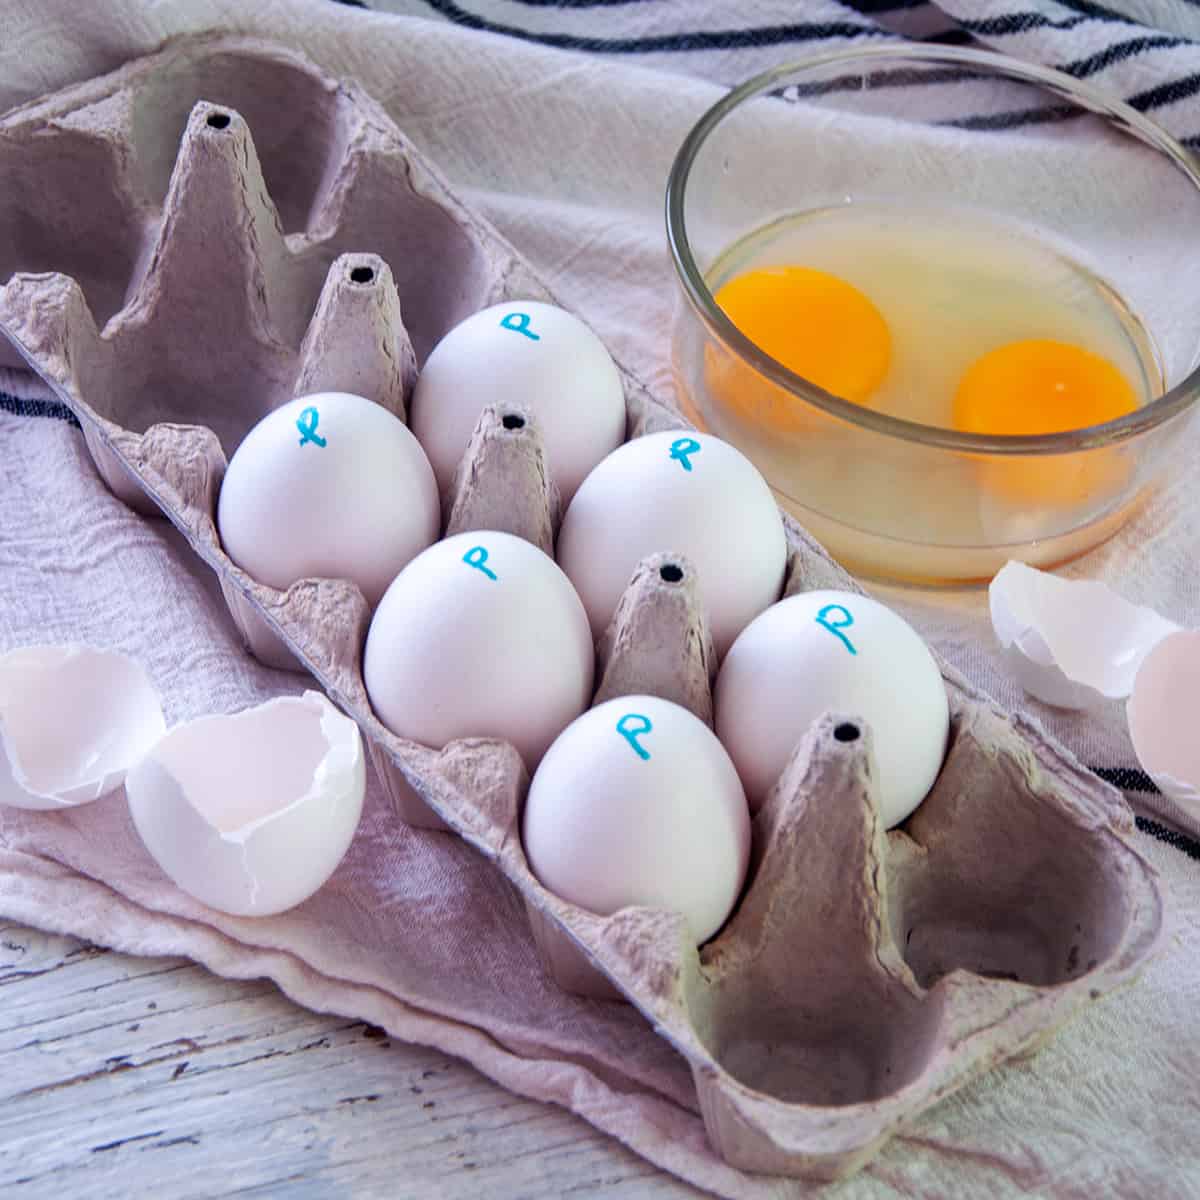 Six pasteurized eggs in an egg carton with the letter 'p' written on them.